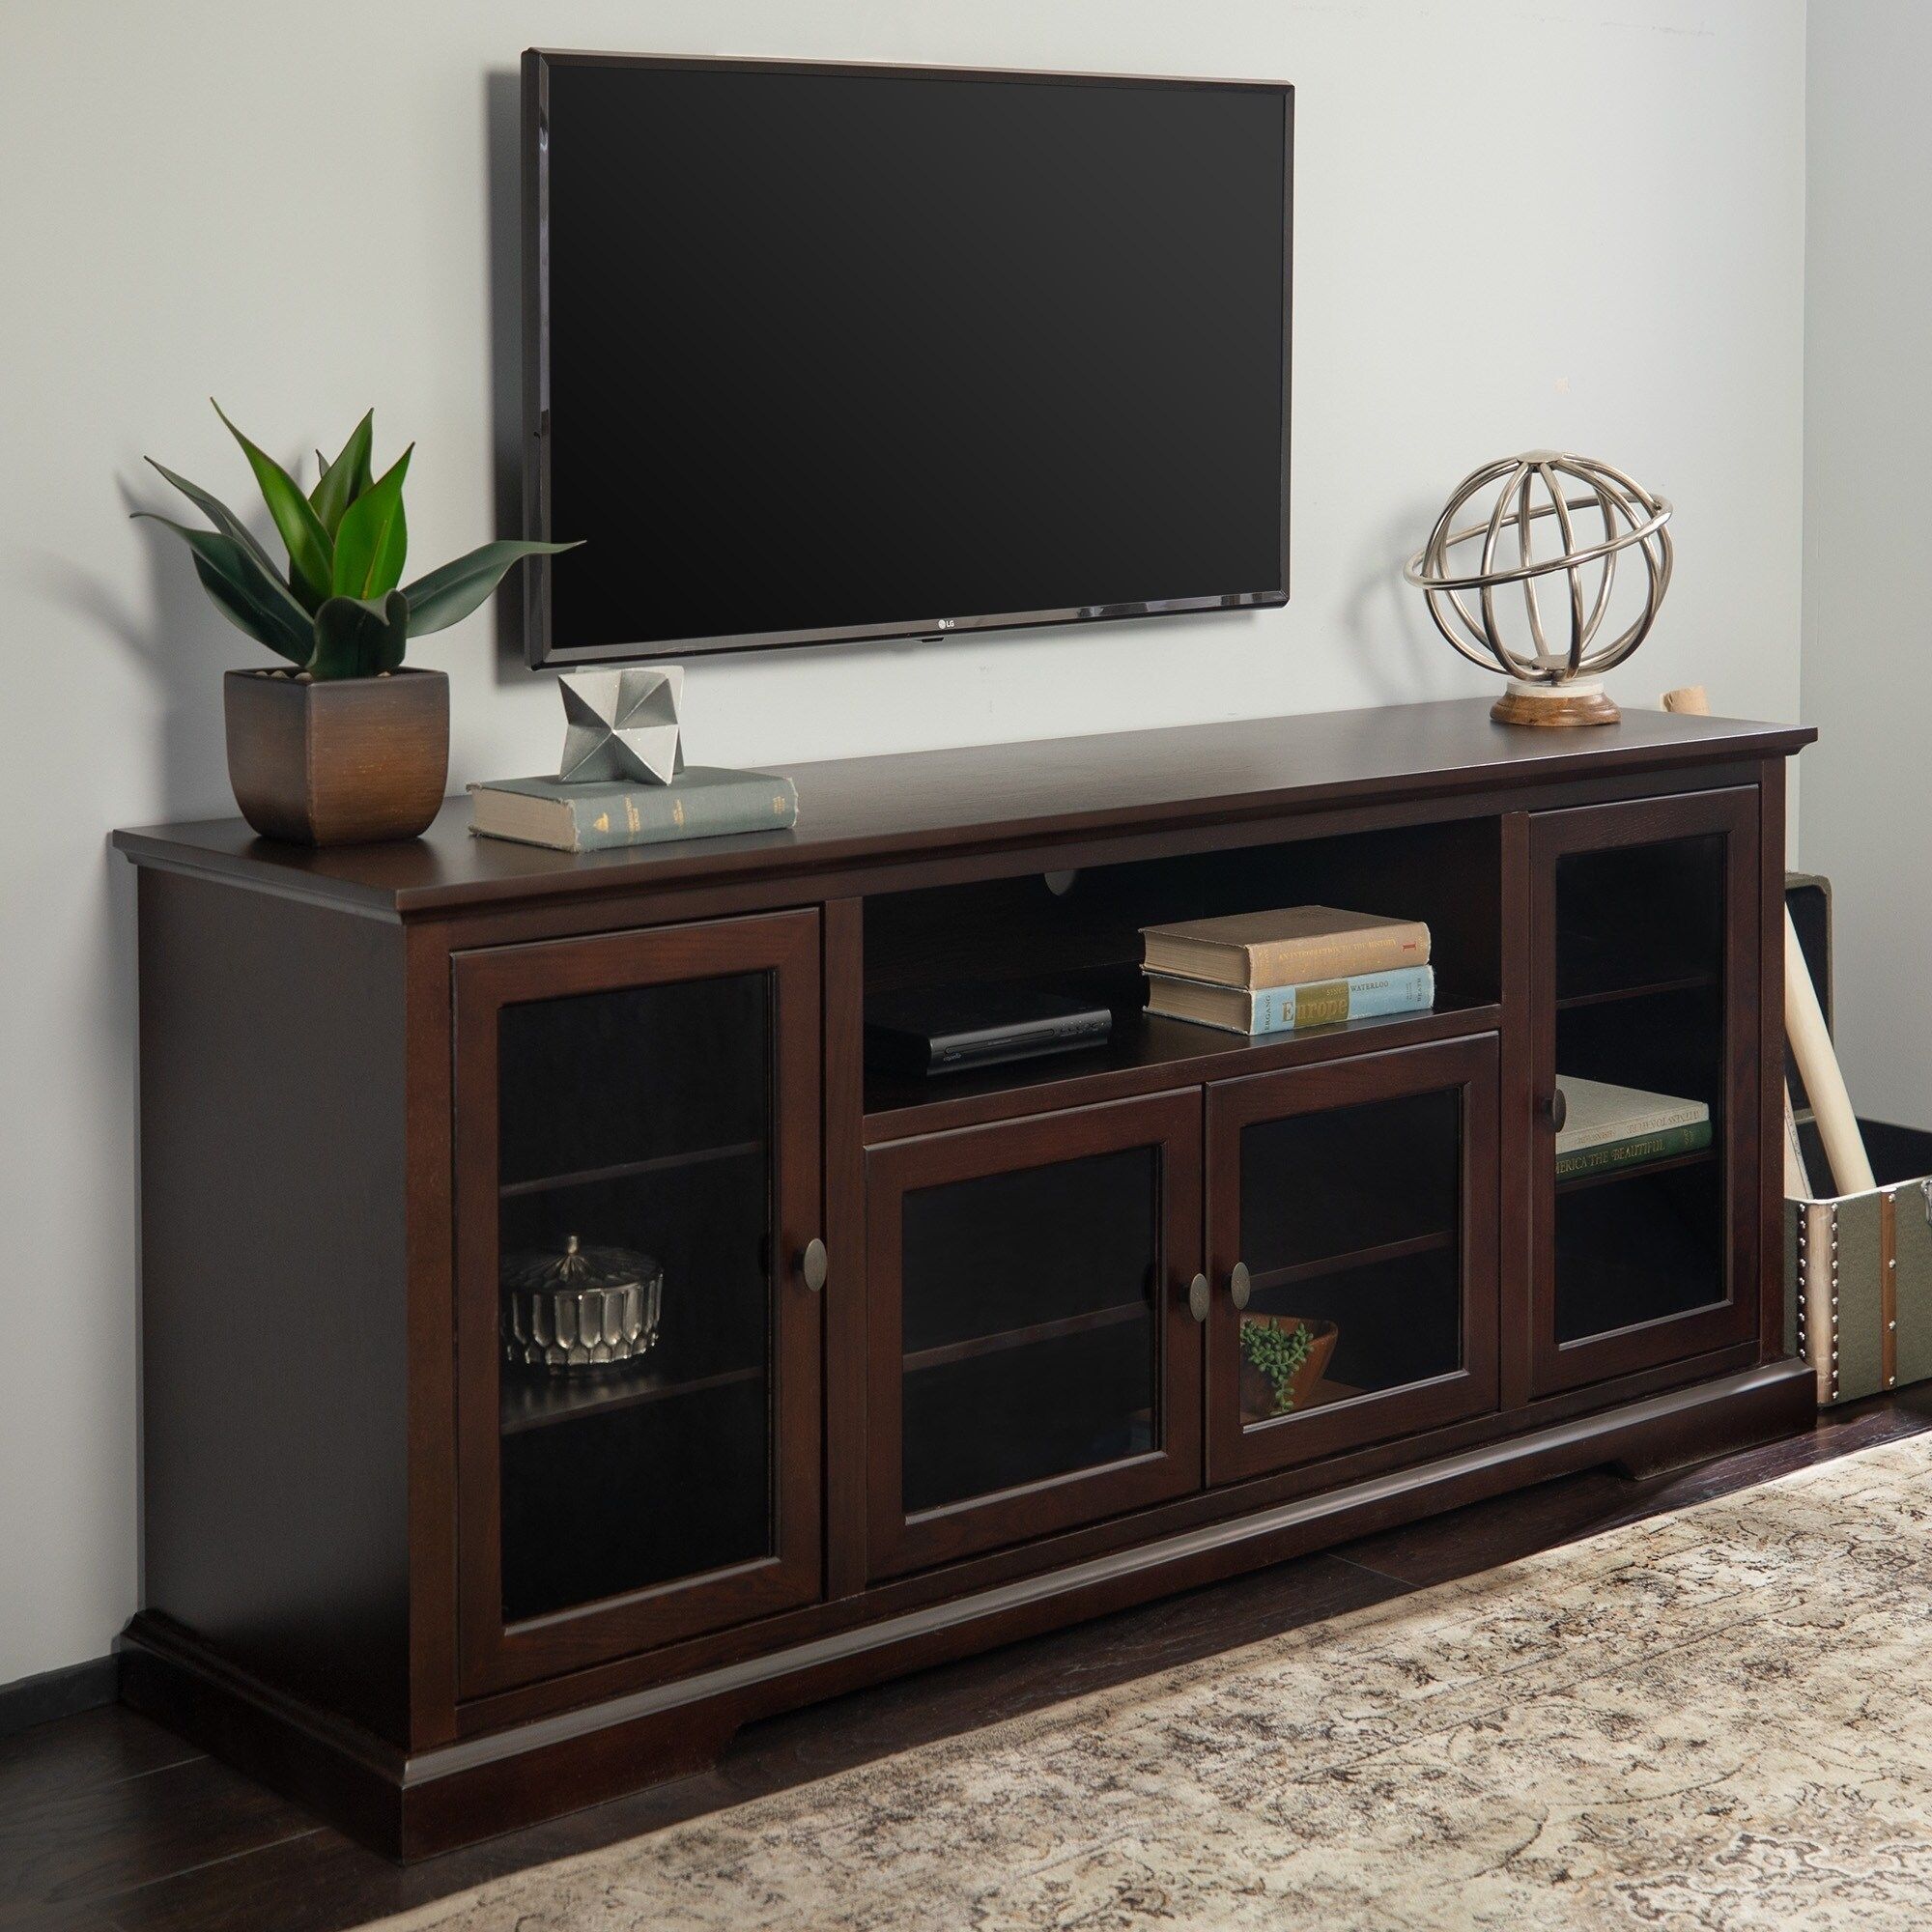 Middlebrook Designs Beaverhead 70 Inch Espresso Highboy Tv In Freestanding Tv Stands (View 2 of 15)